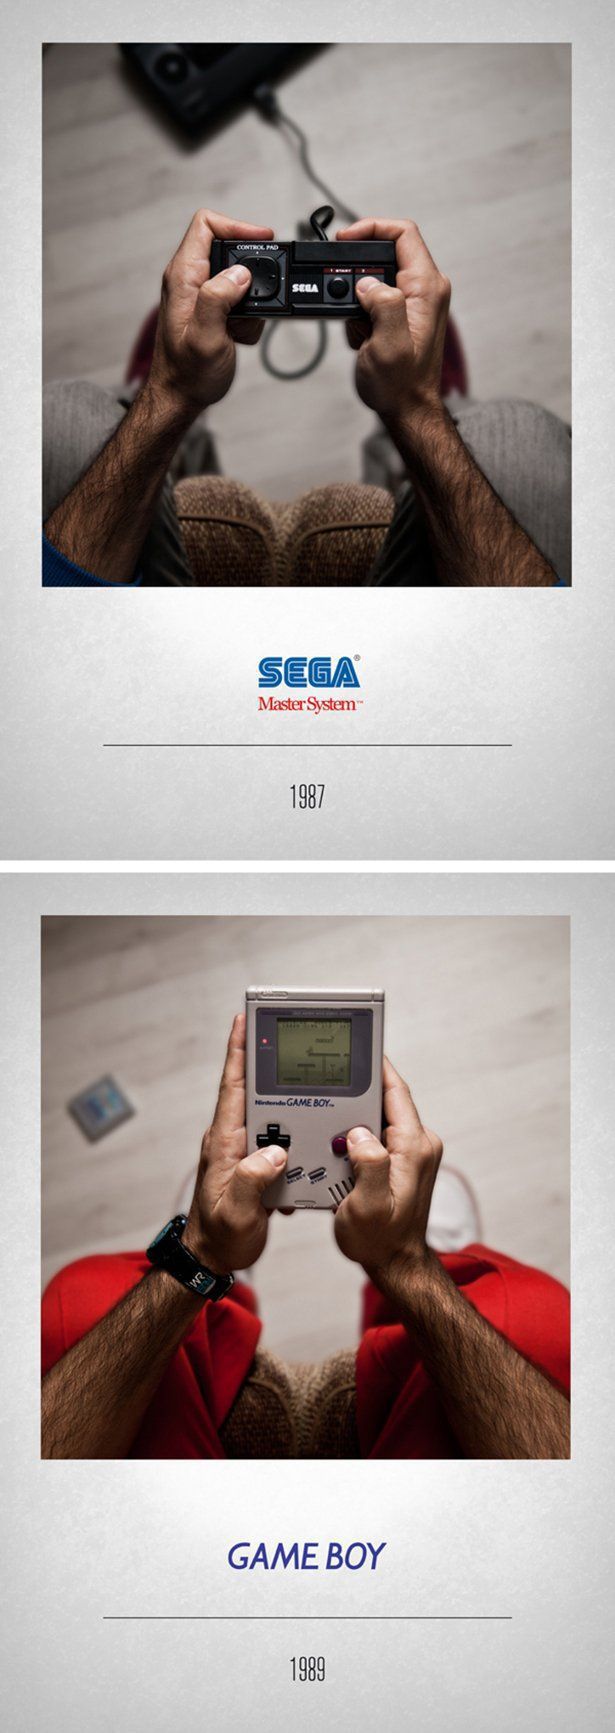 How Video Game Controllers Have Changed Over the Years